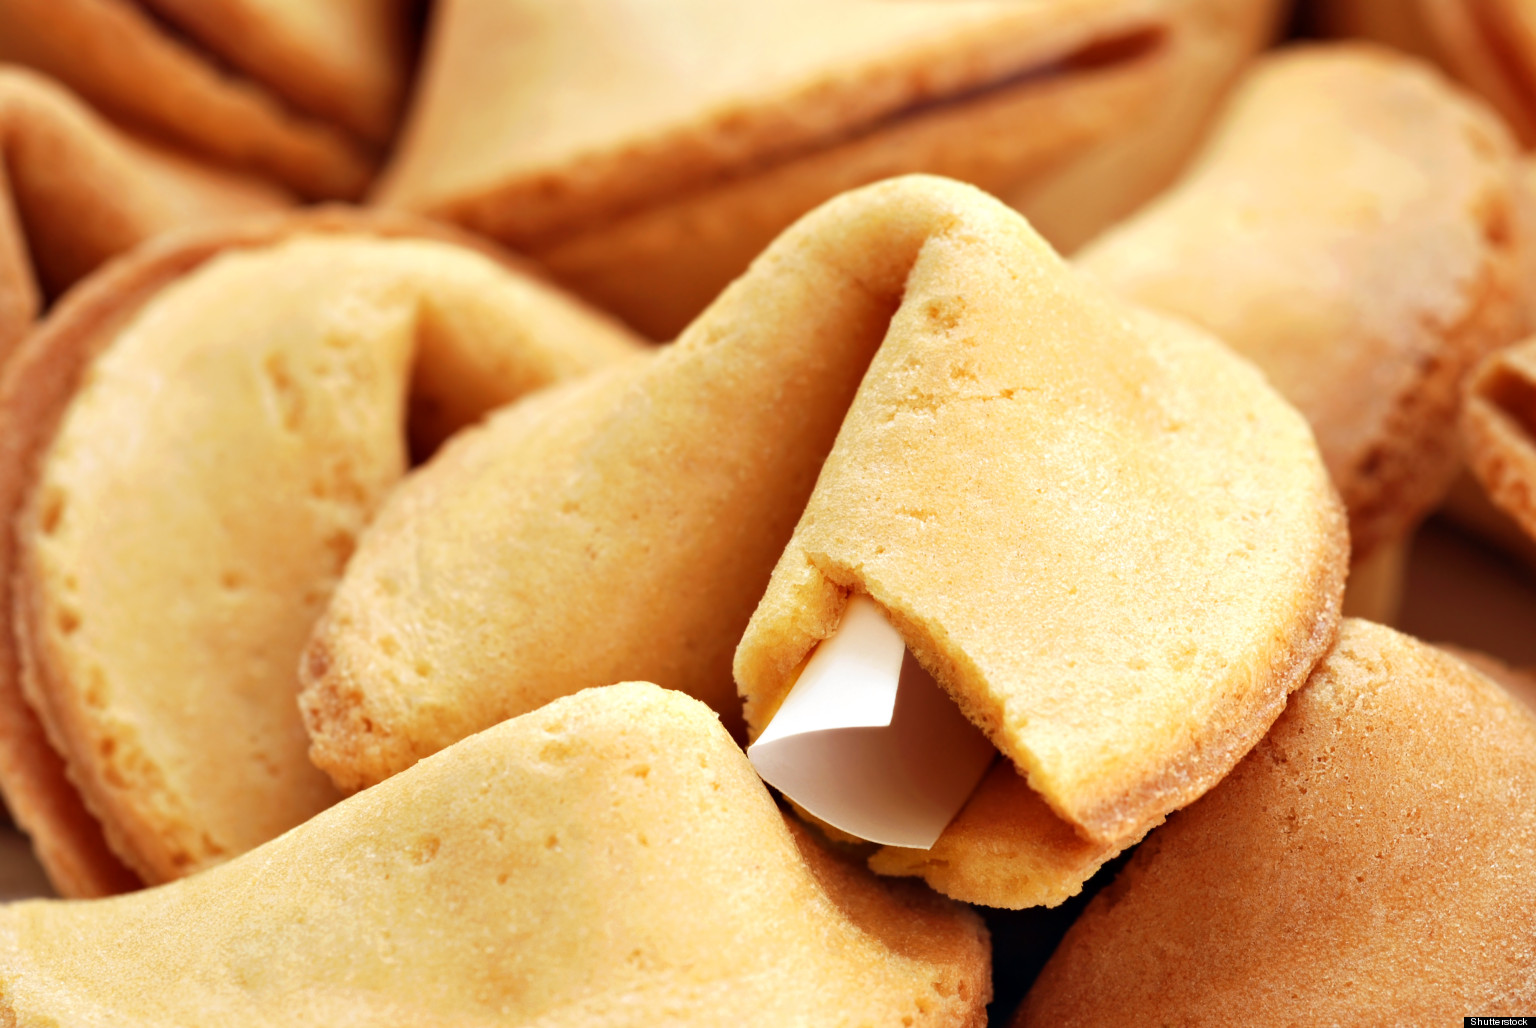 Can You Name the Nationalities of These Foods? 🍕🍟🌮 FORTUNE COOKIES